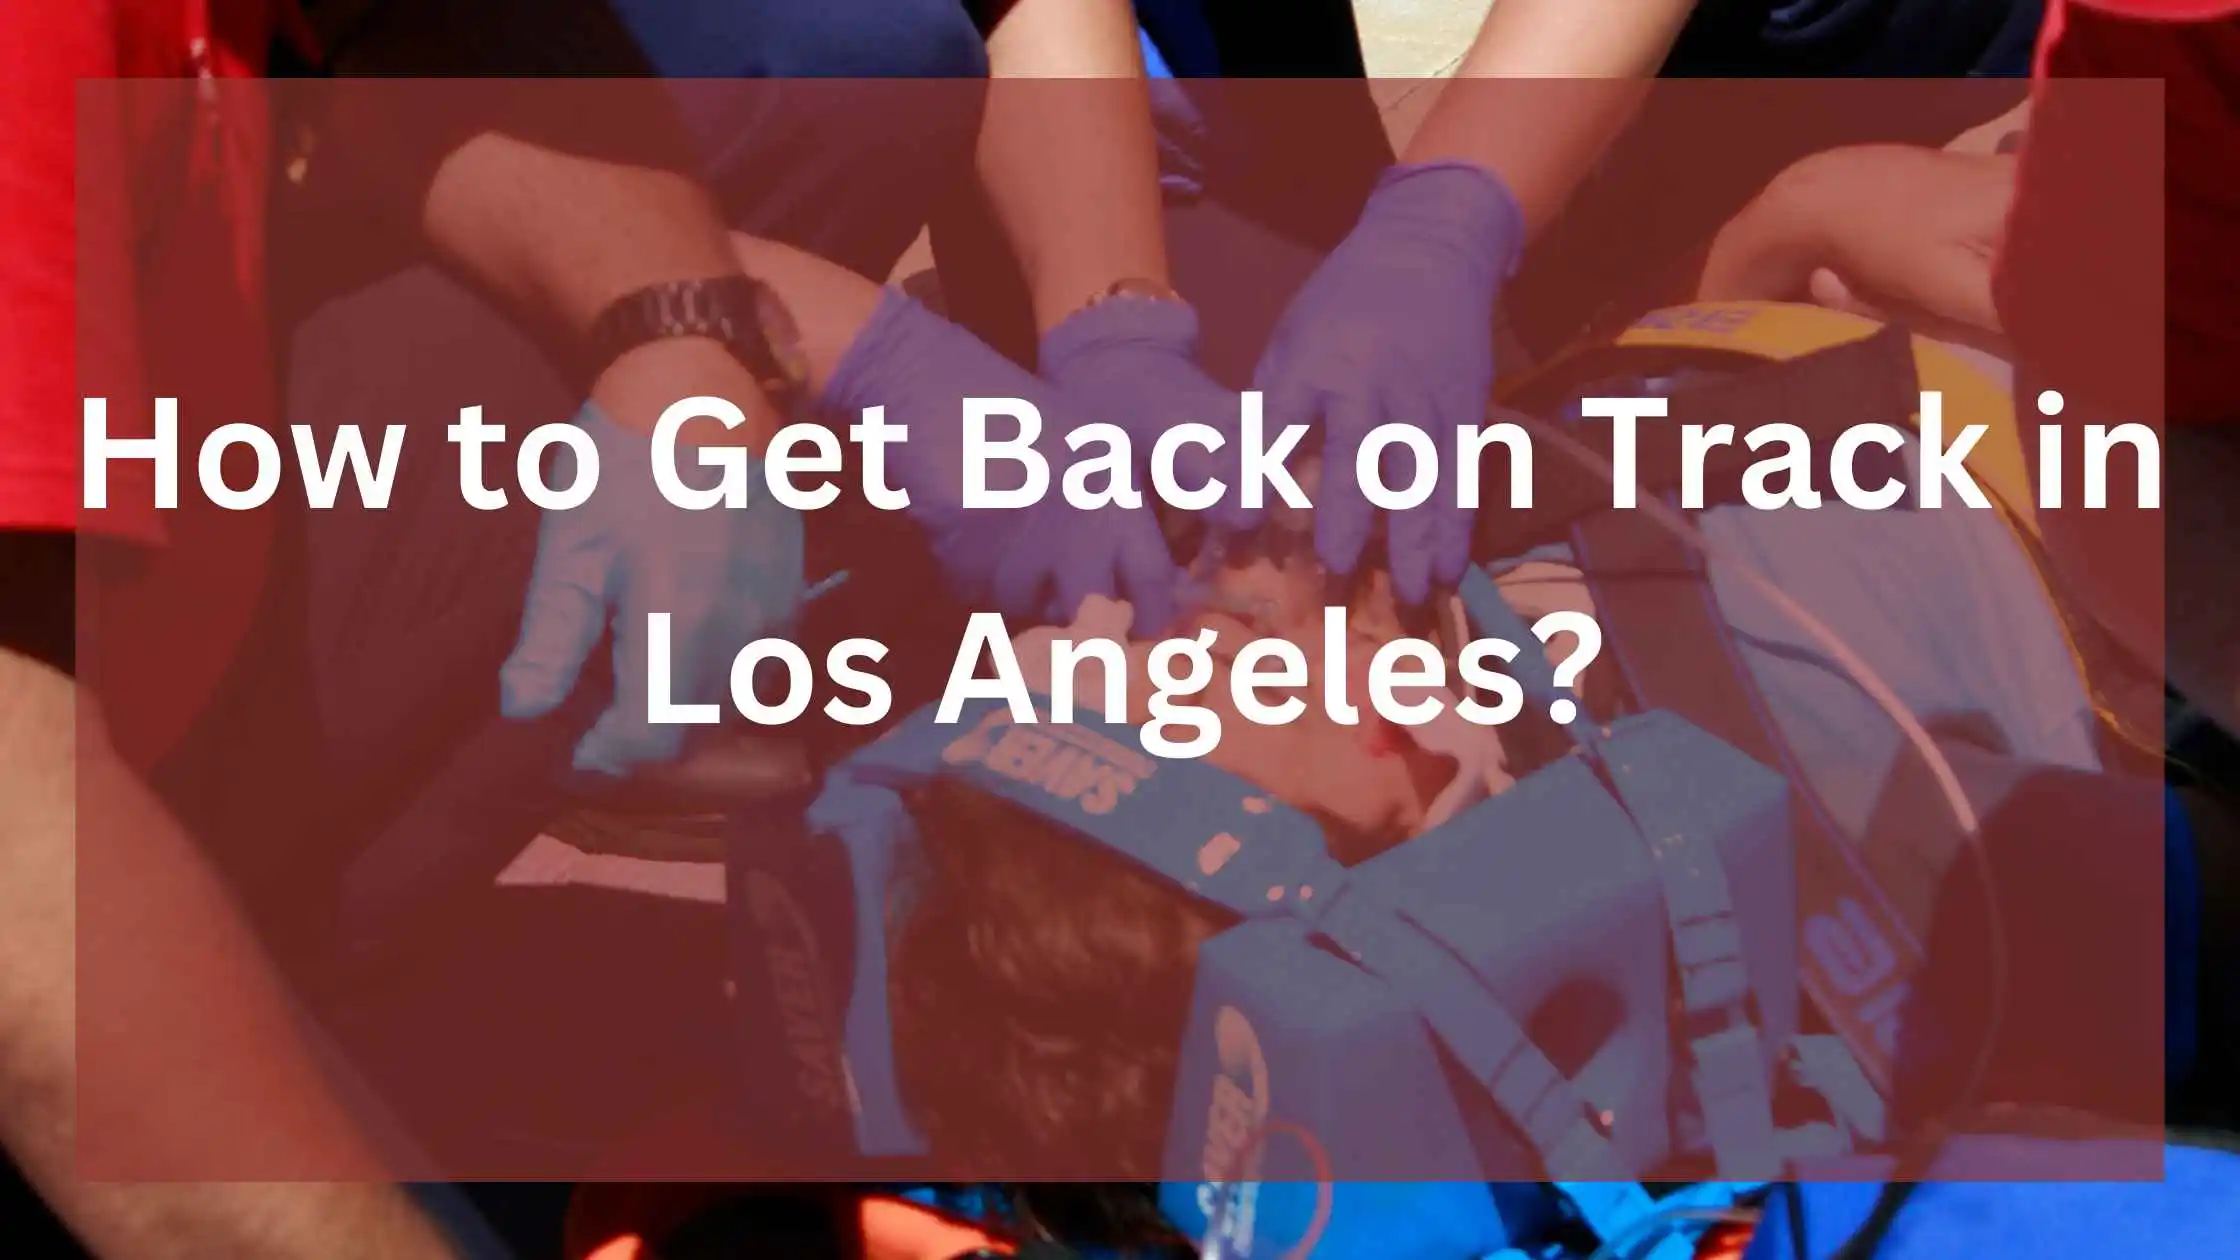 How to Get Back on Track in Los Angeles